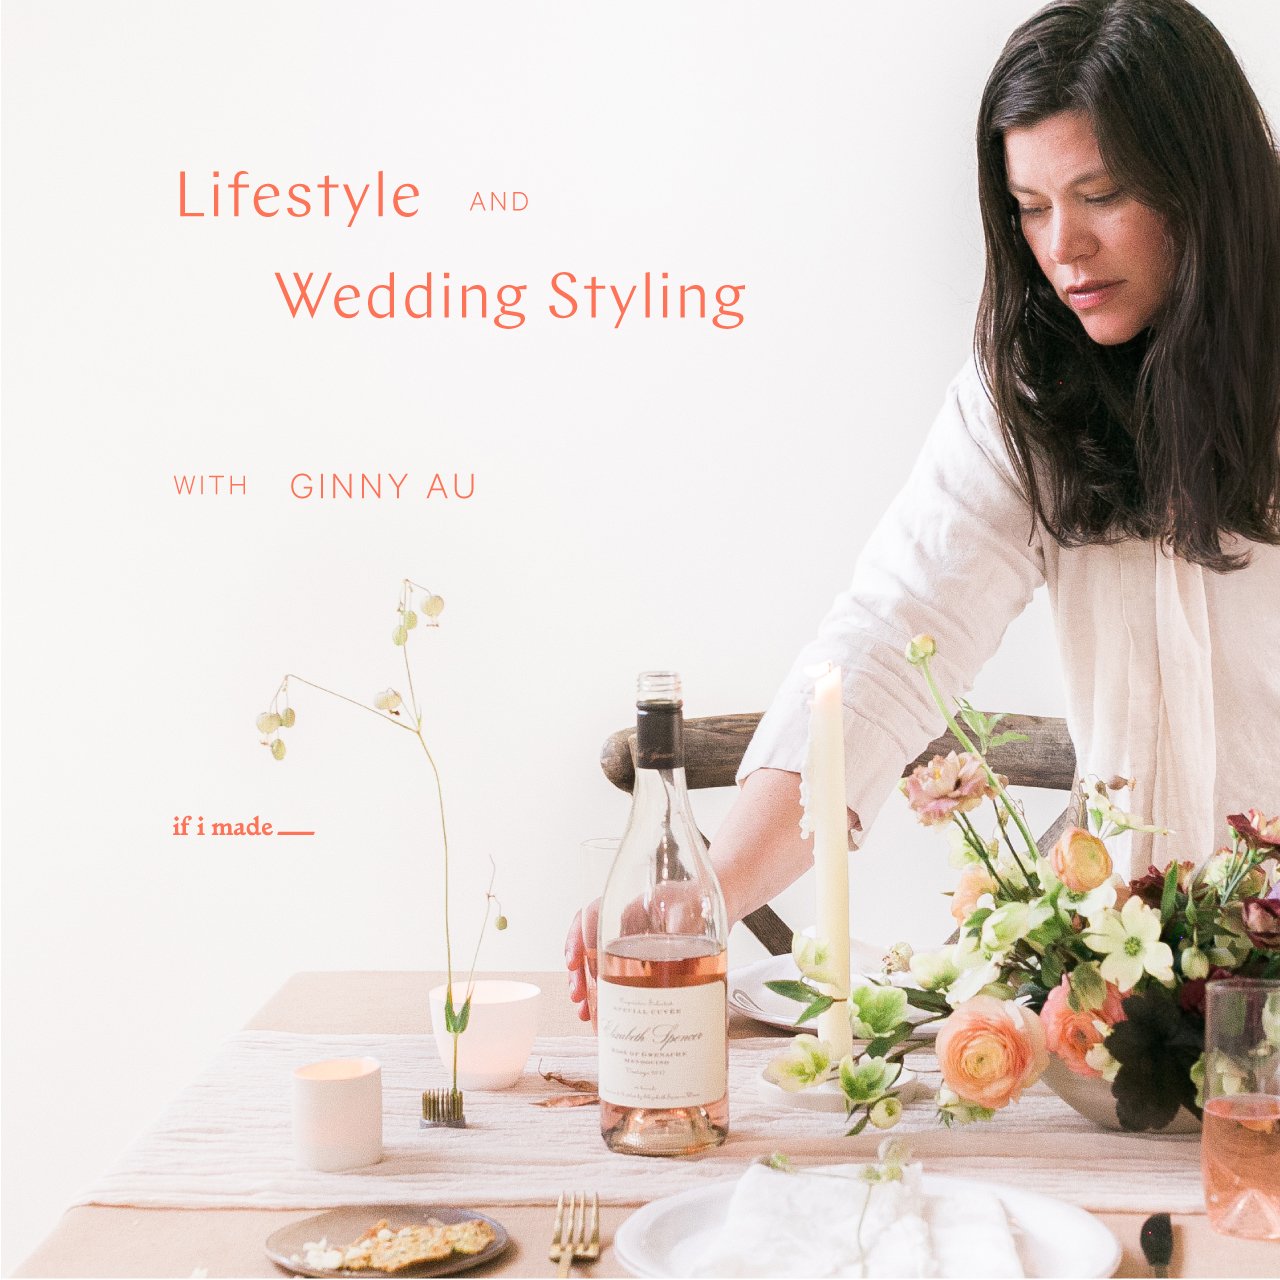 Lifestyle and Wedding Styling with Ginny Au (RPP) - 16 payments of $99